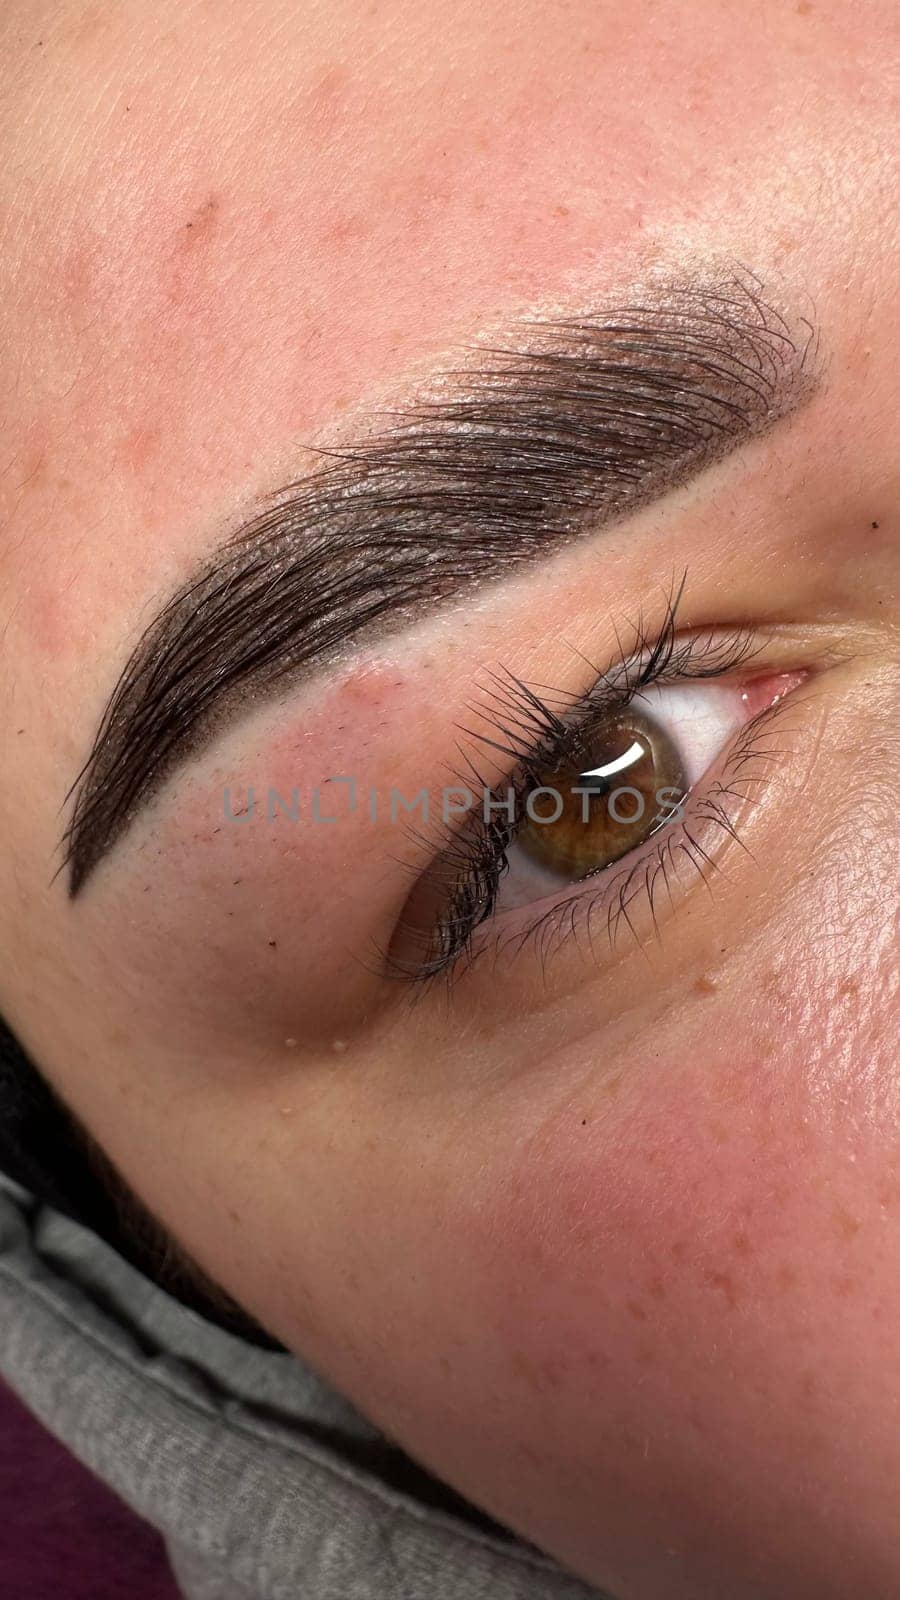 Eyebrows tattoo or Permanent Makeup. by SmirMaxStock